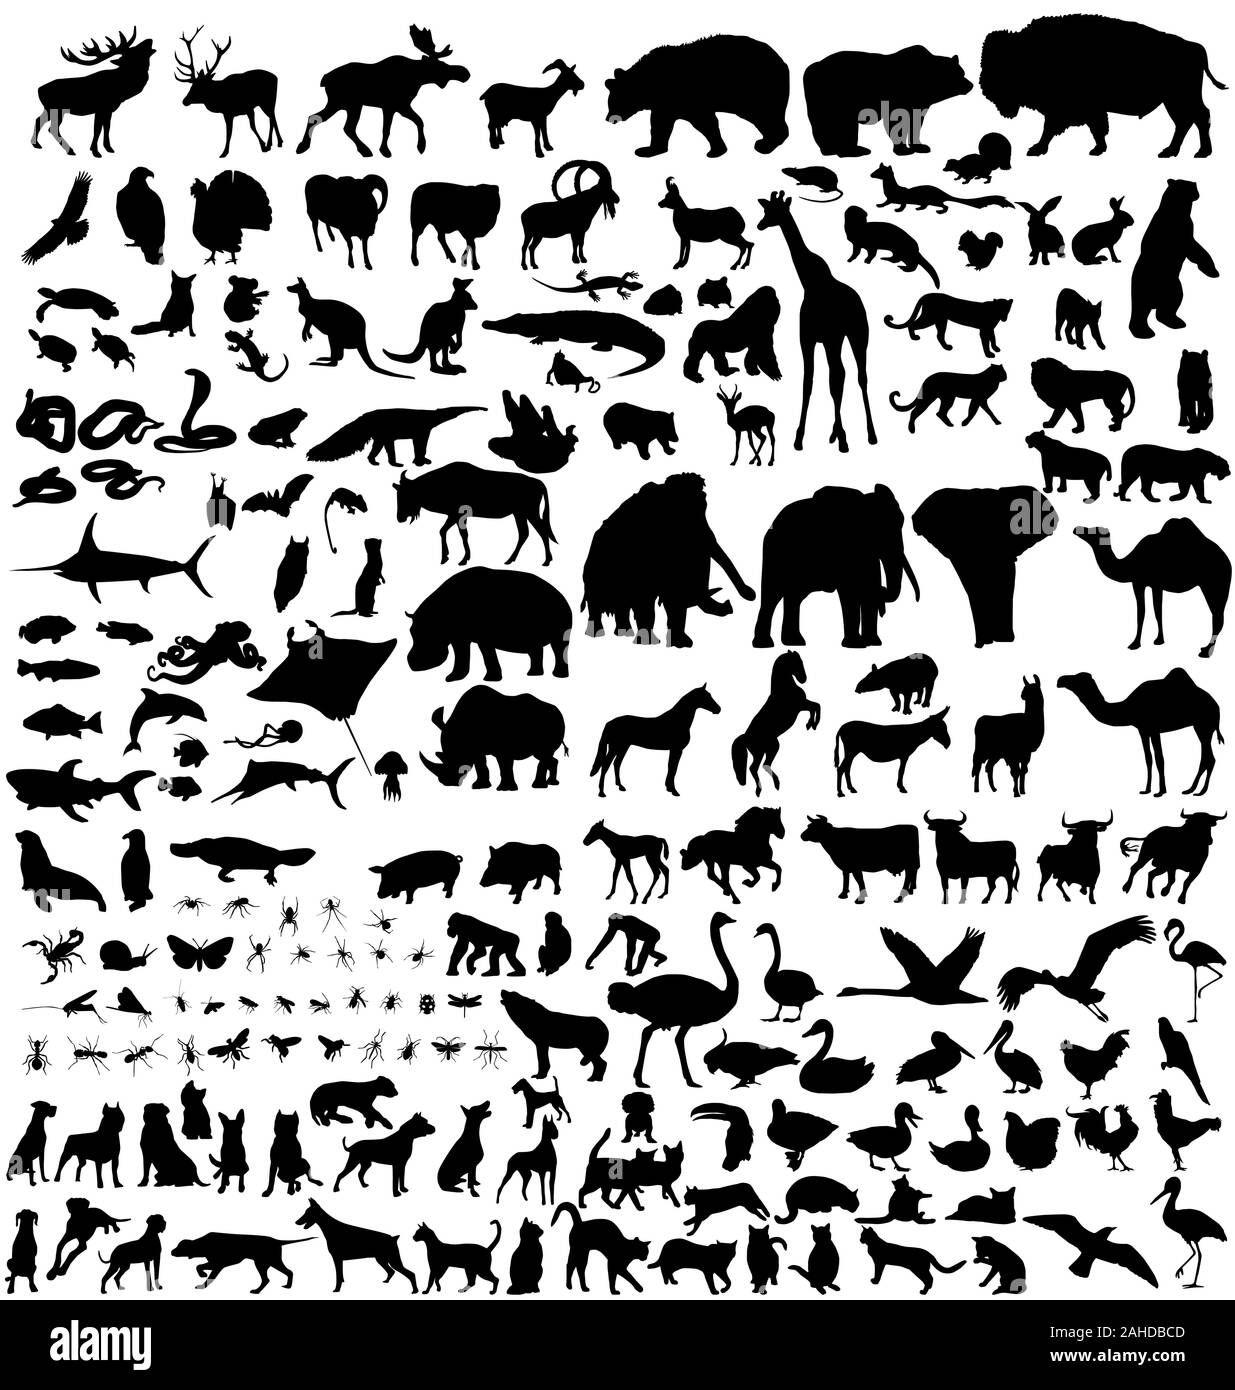 large set of animals vector silhouettes Stock Vector